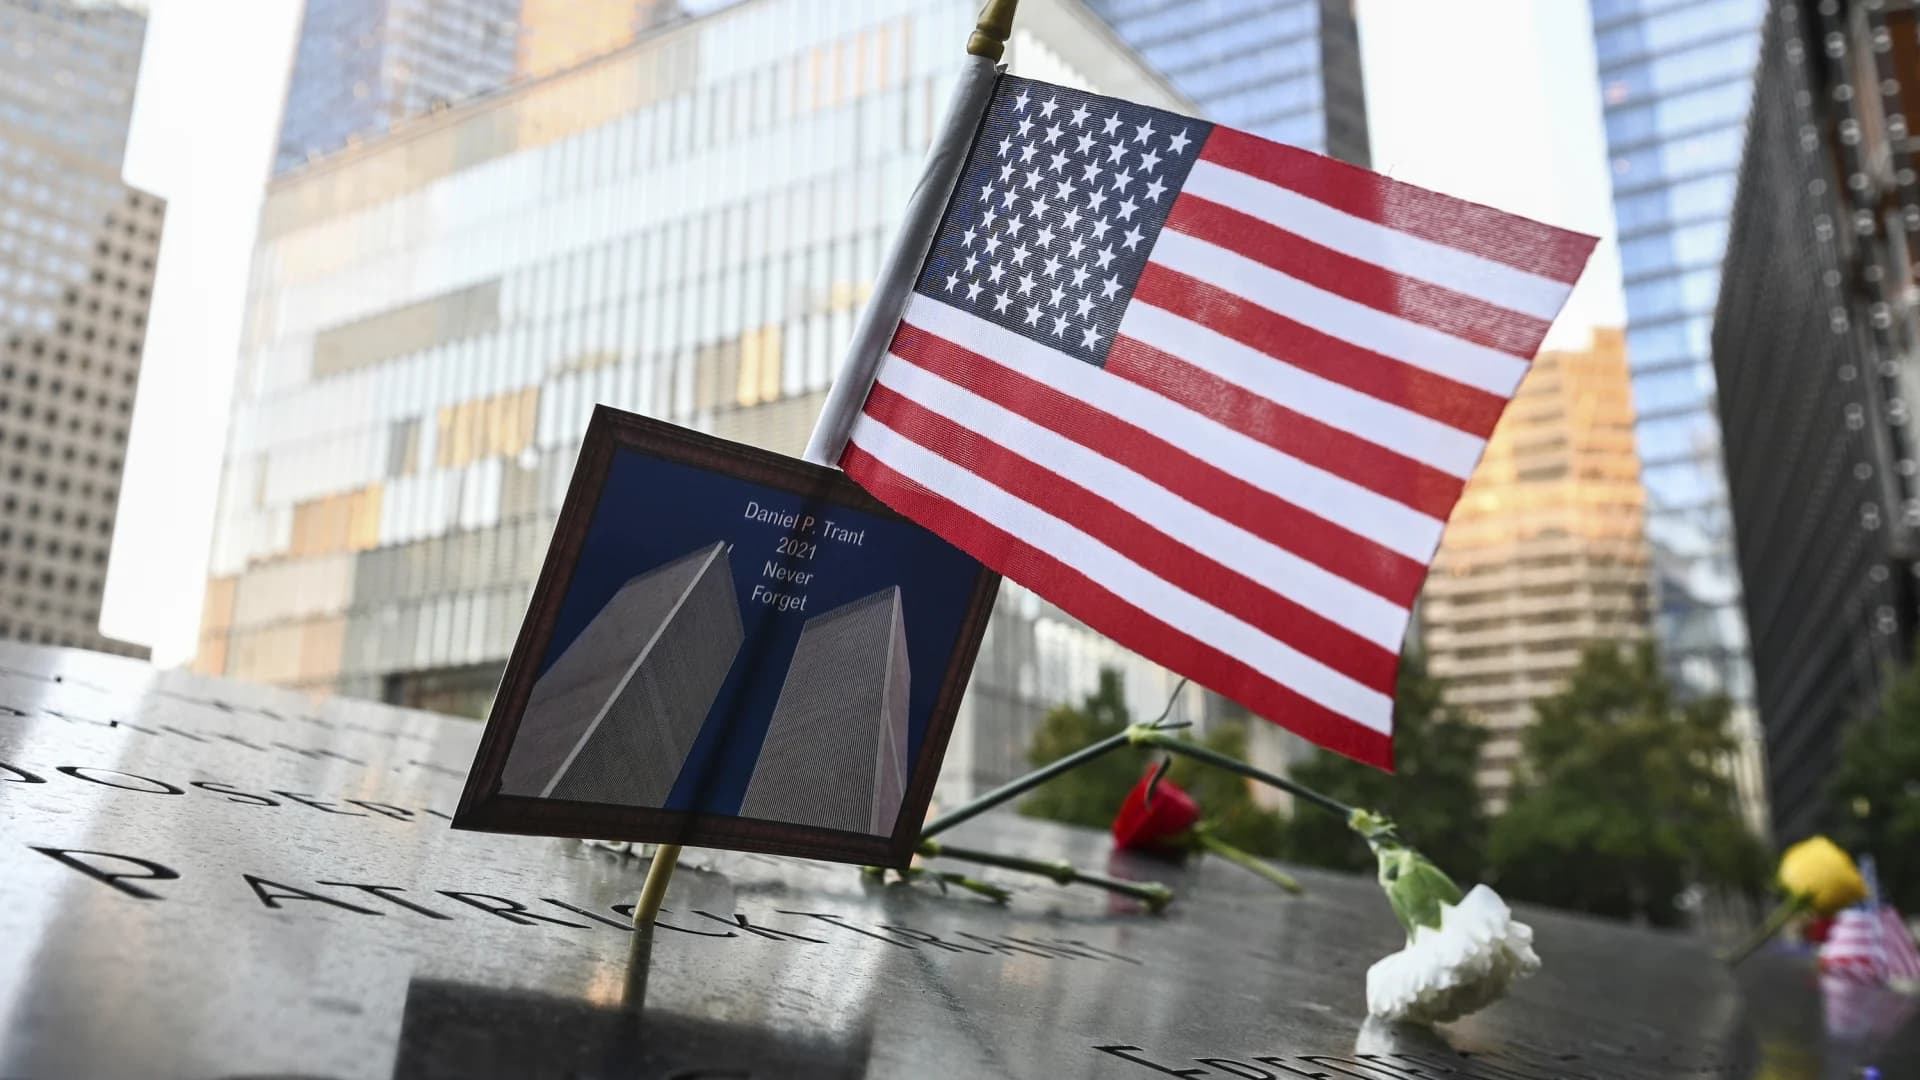 Special Coverage: Ceremonies marking 20 years since 9/11